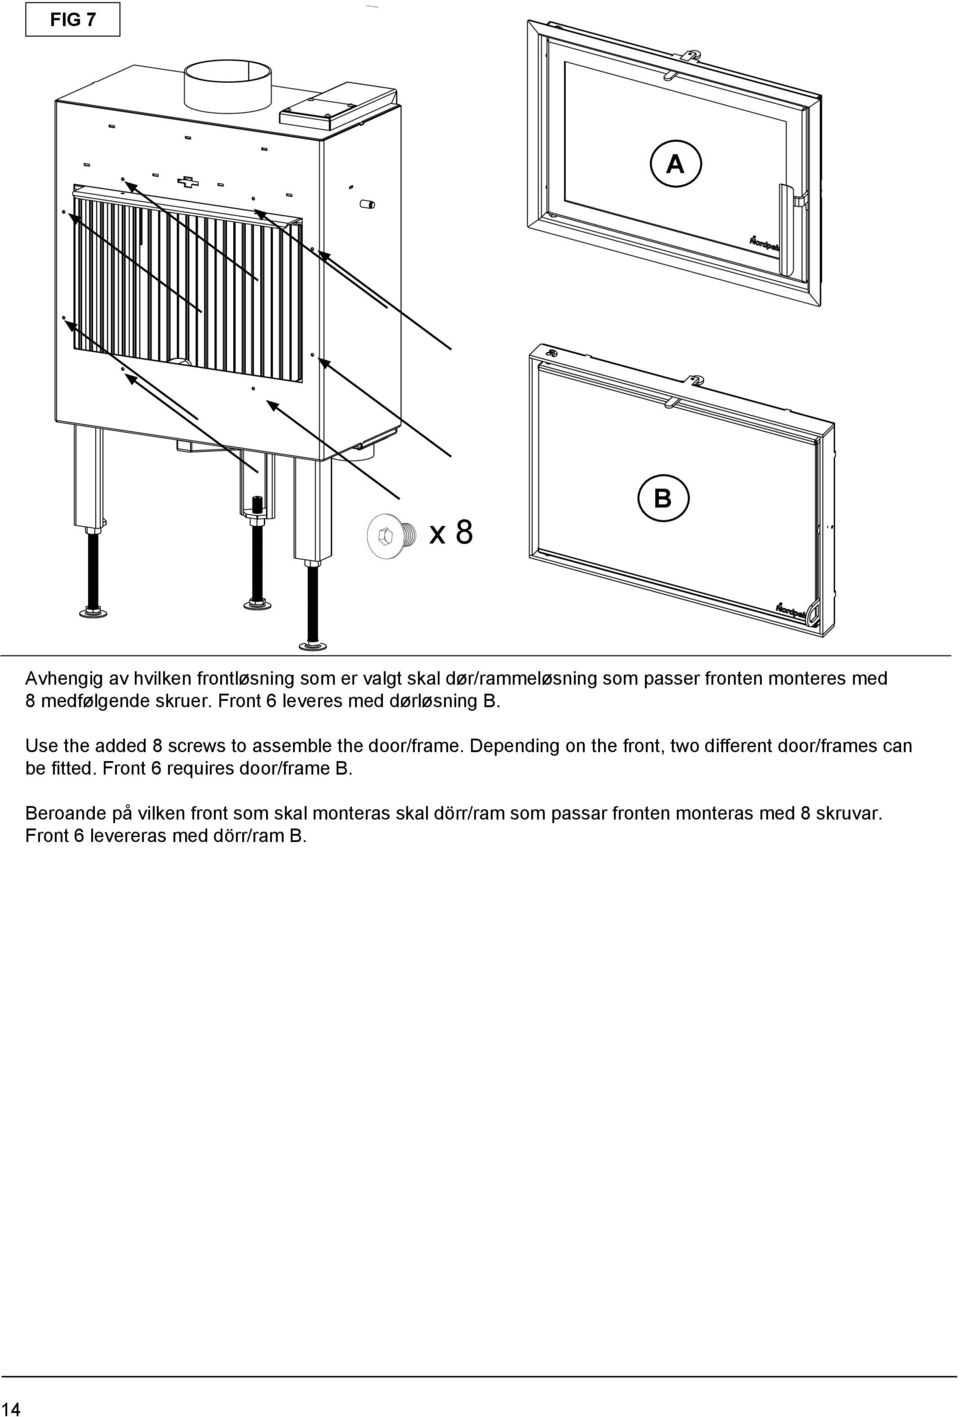 Depending on the front, two different door/frames can be fitted Front 6 requires door/frame B Beroande på